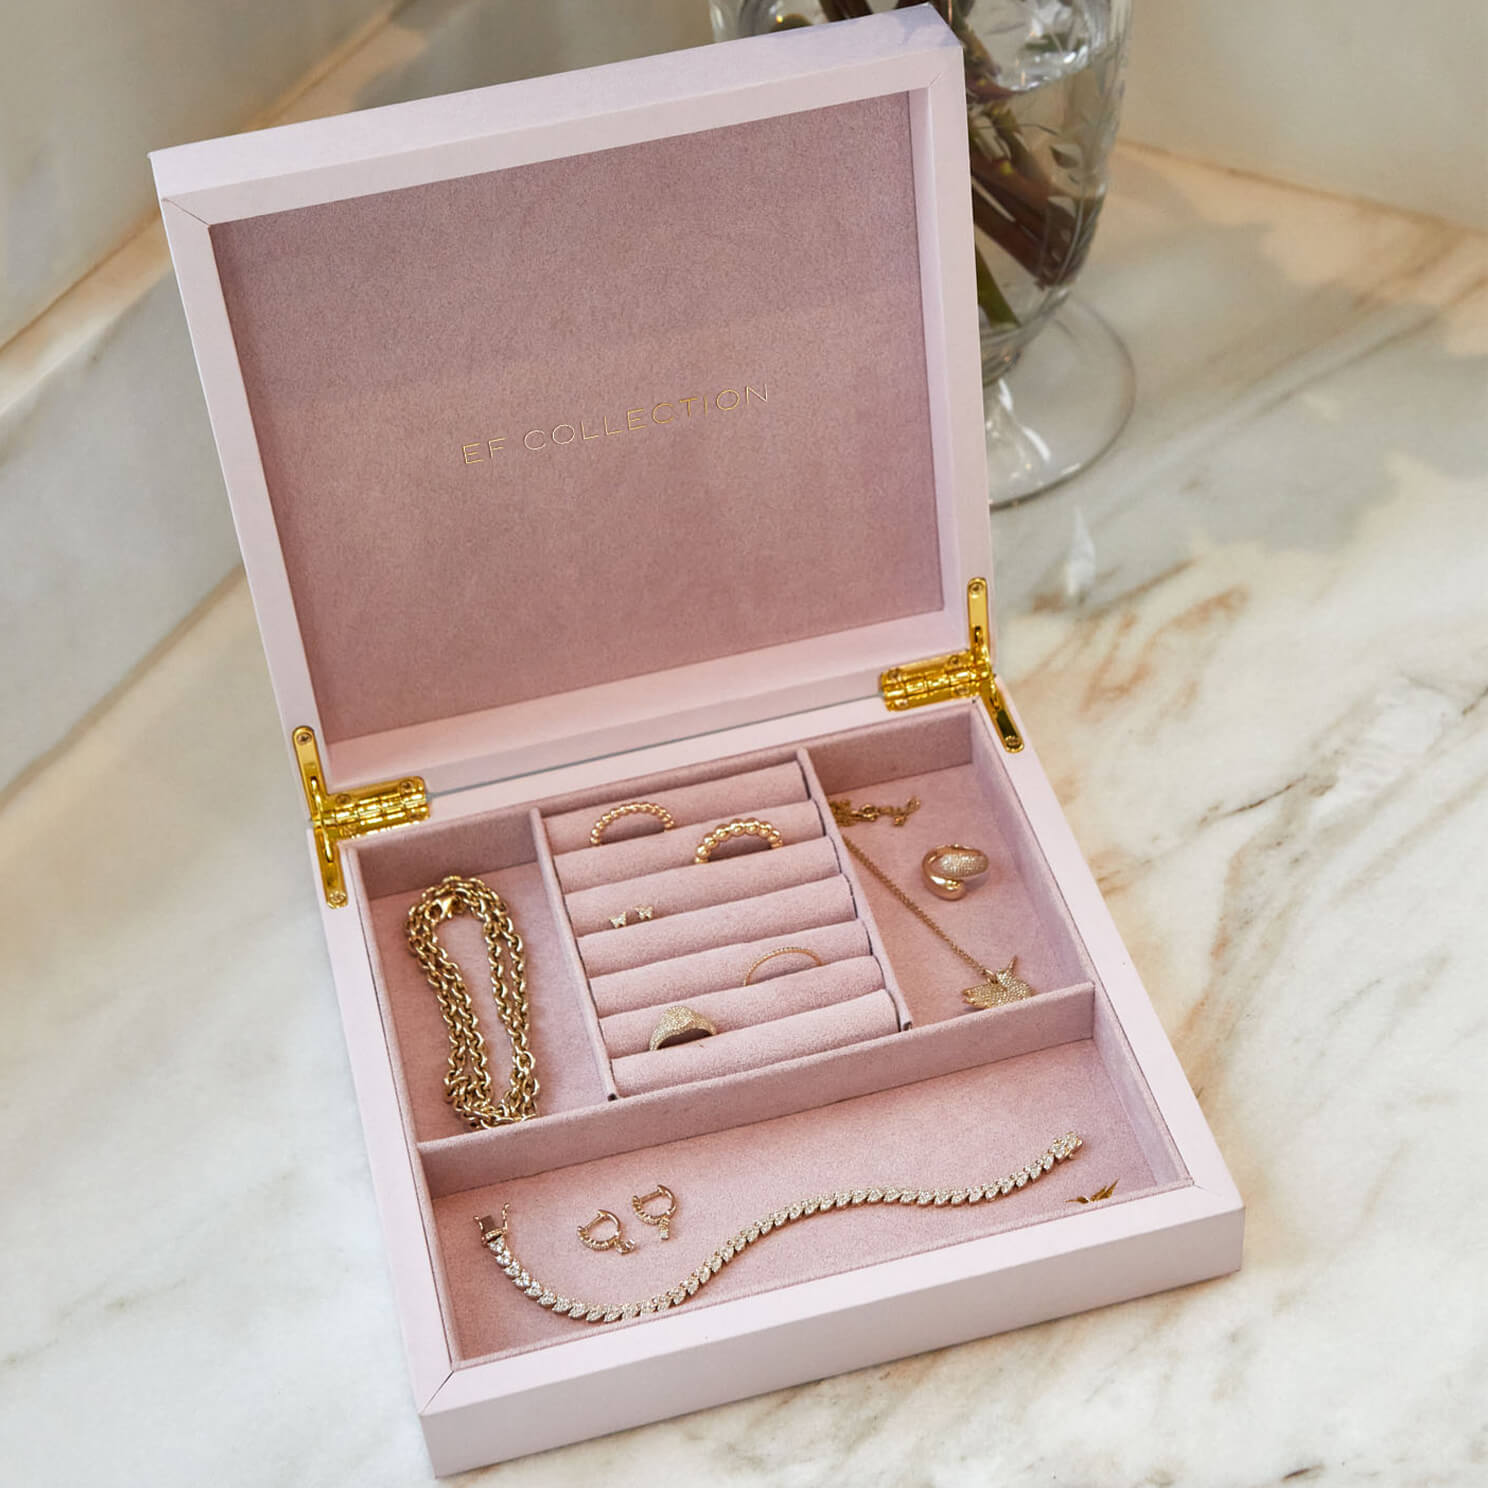 Signature Jewelry Box in the color pink displayed with 14k yellow gold rings, bracelets, earrings, and necklaces